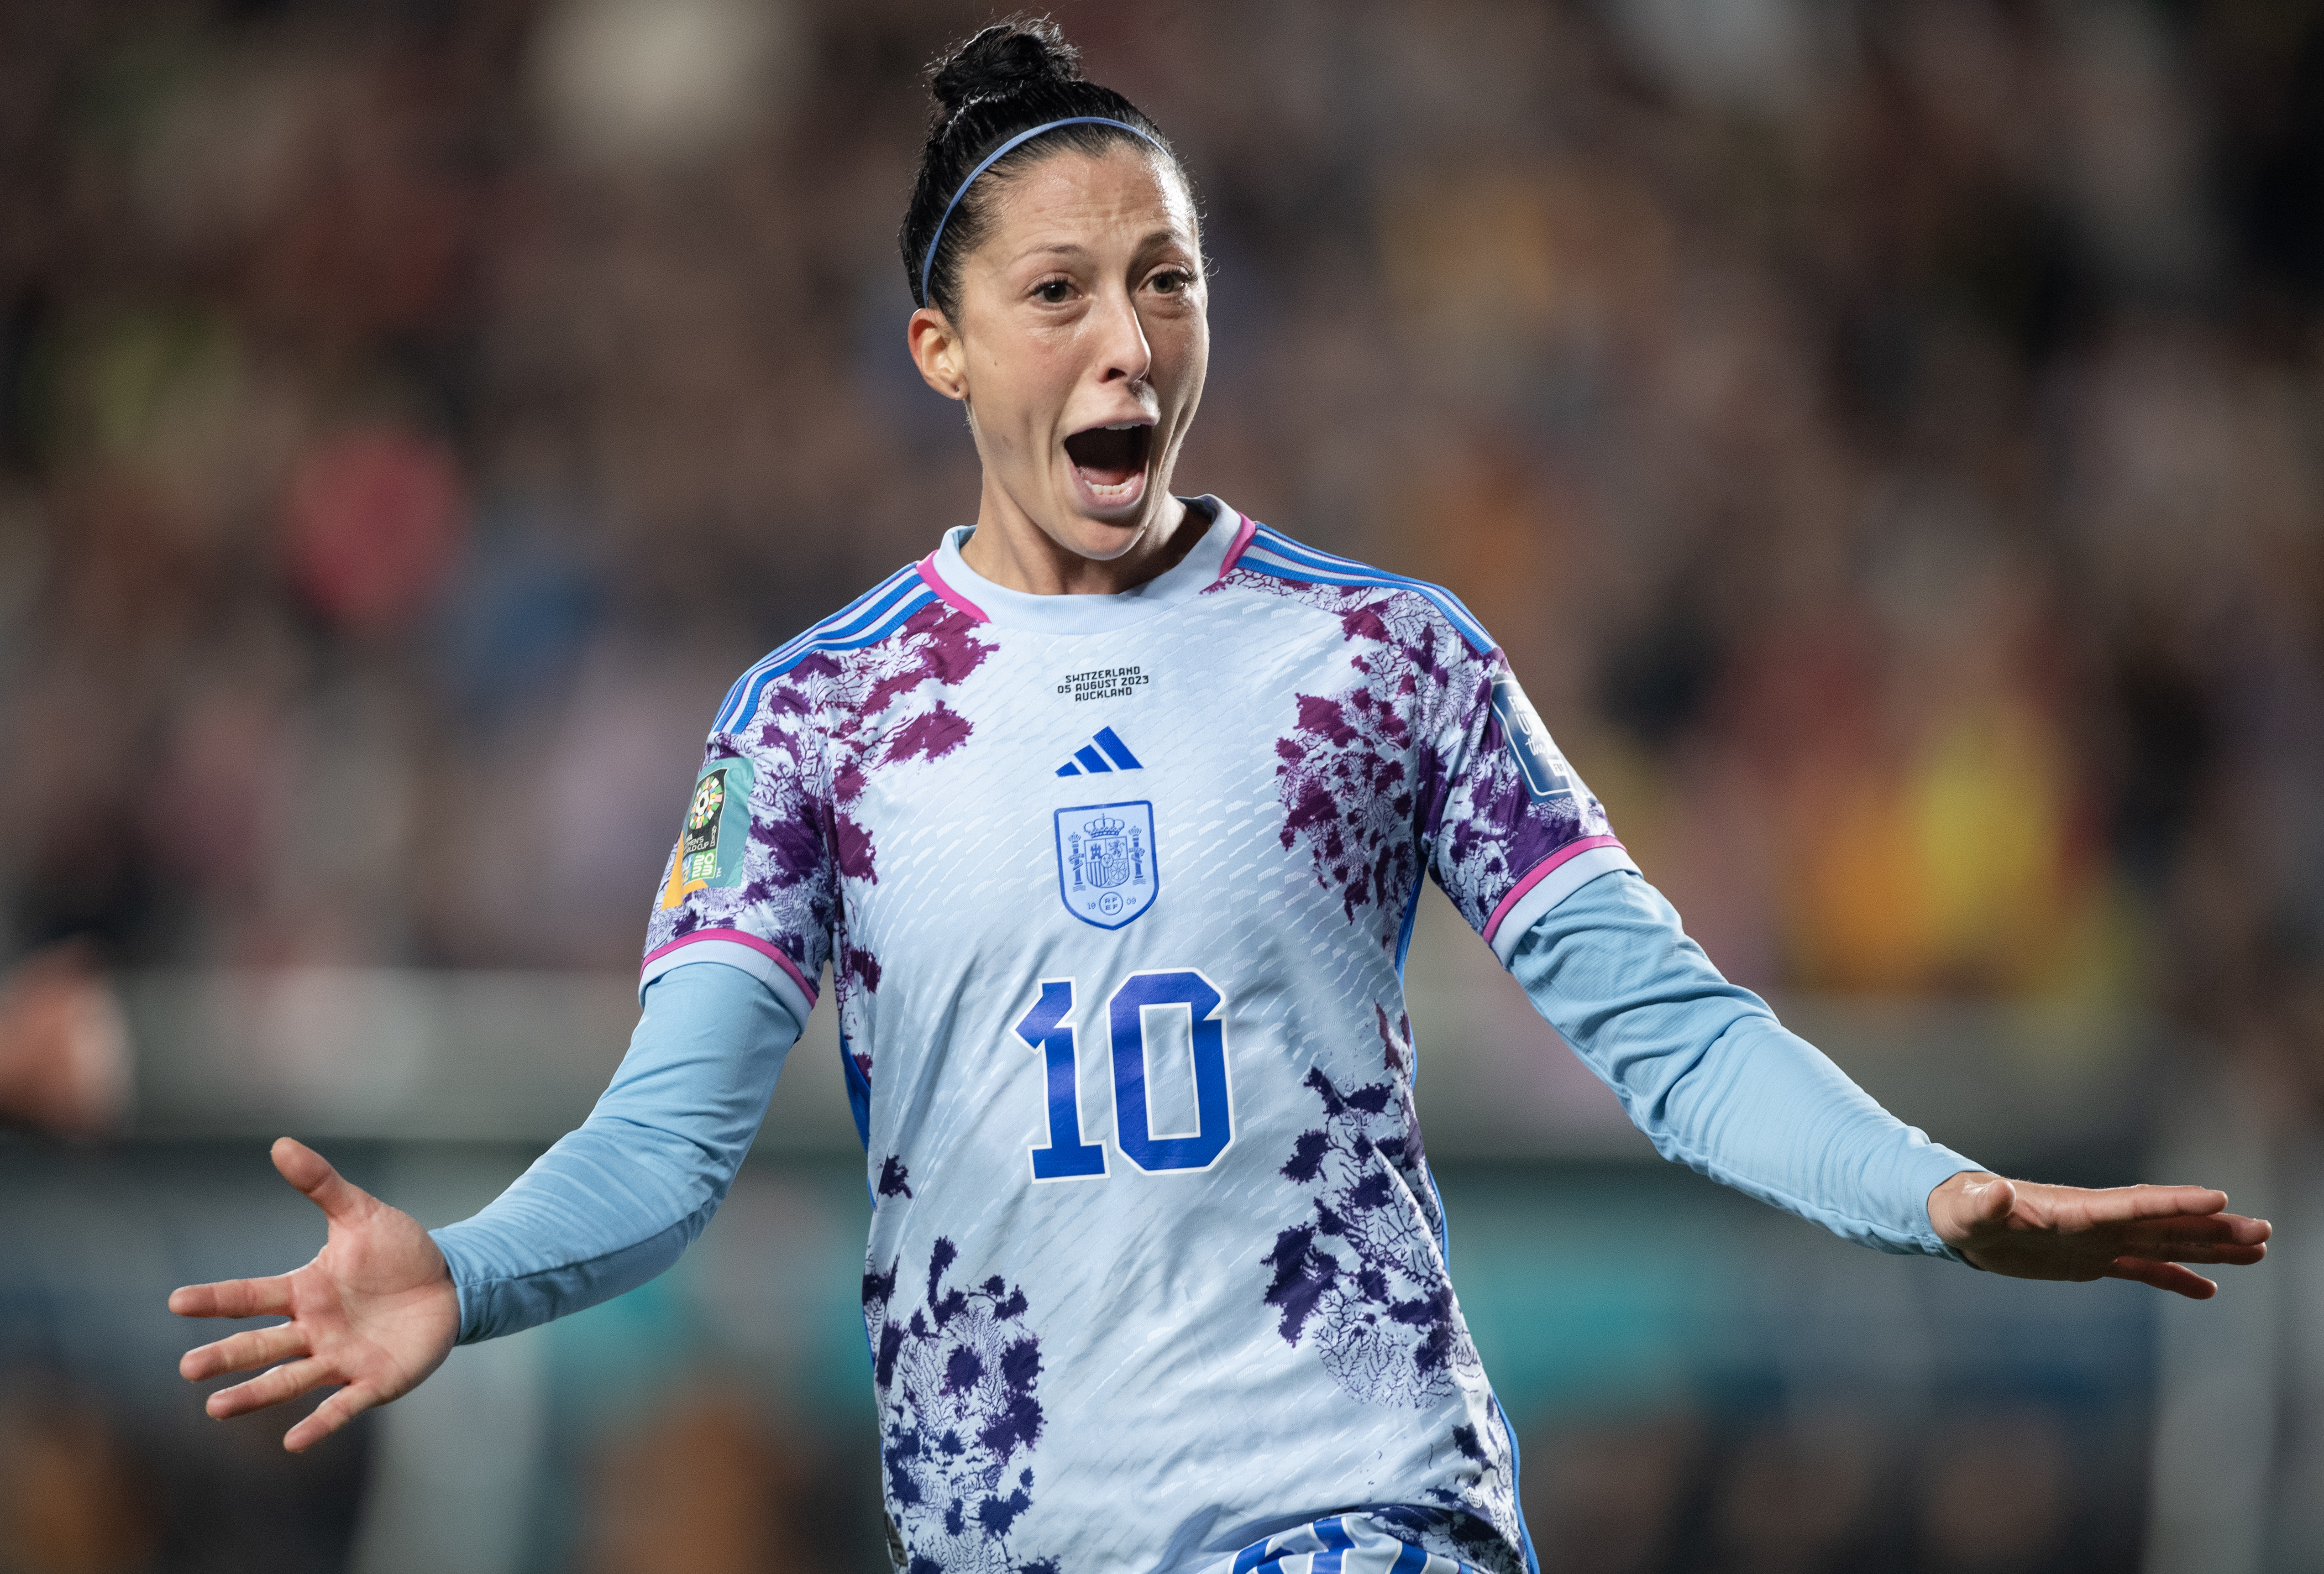 Jenni Hermoso a female soccer player in action, wearing a blue and purple patterned jersey with the number 10. She has her mouth open as if shouting and her arms extended to the side, expressing intense emotion during a game. 